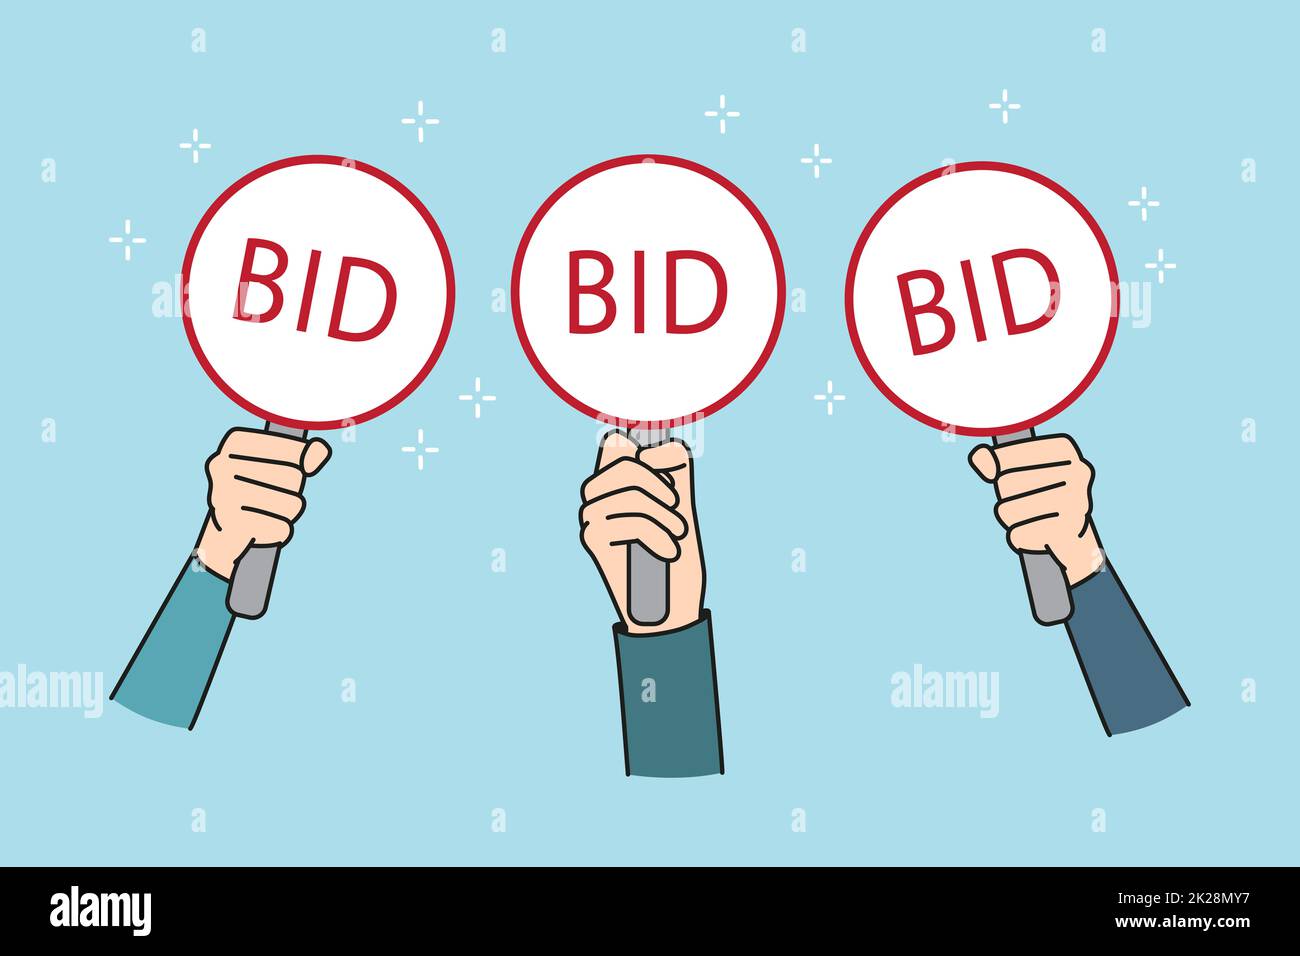 Taking part in auction concept Stock Photo